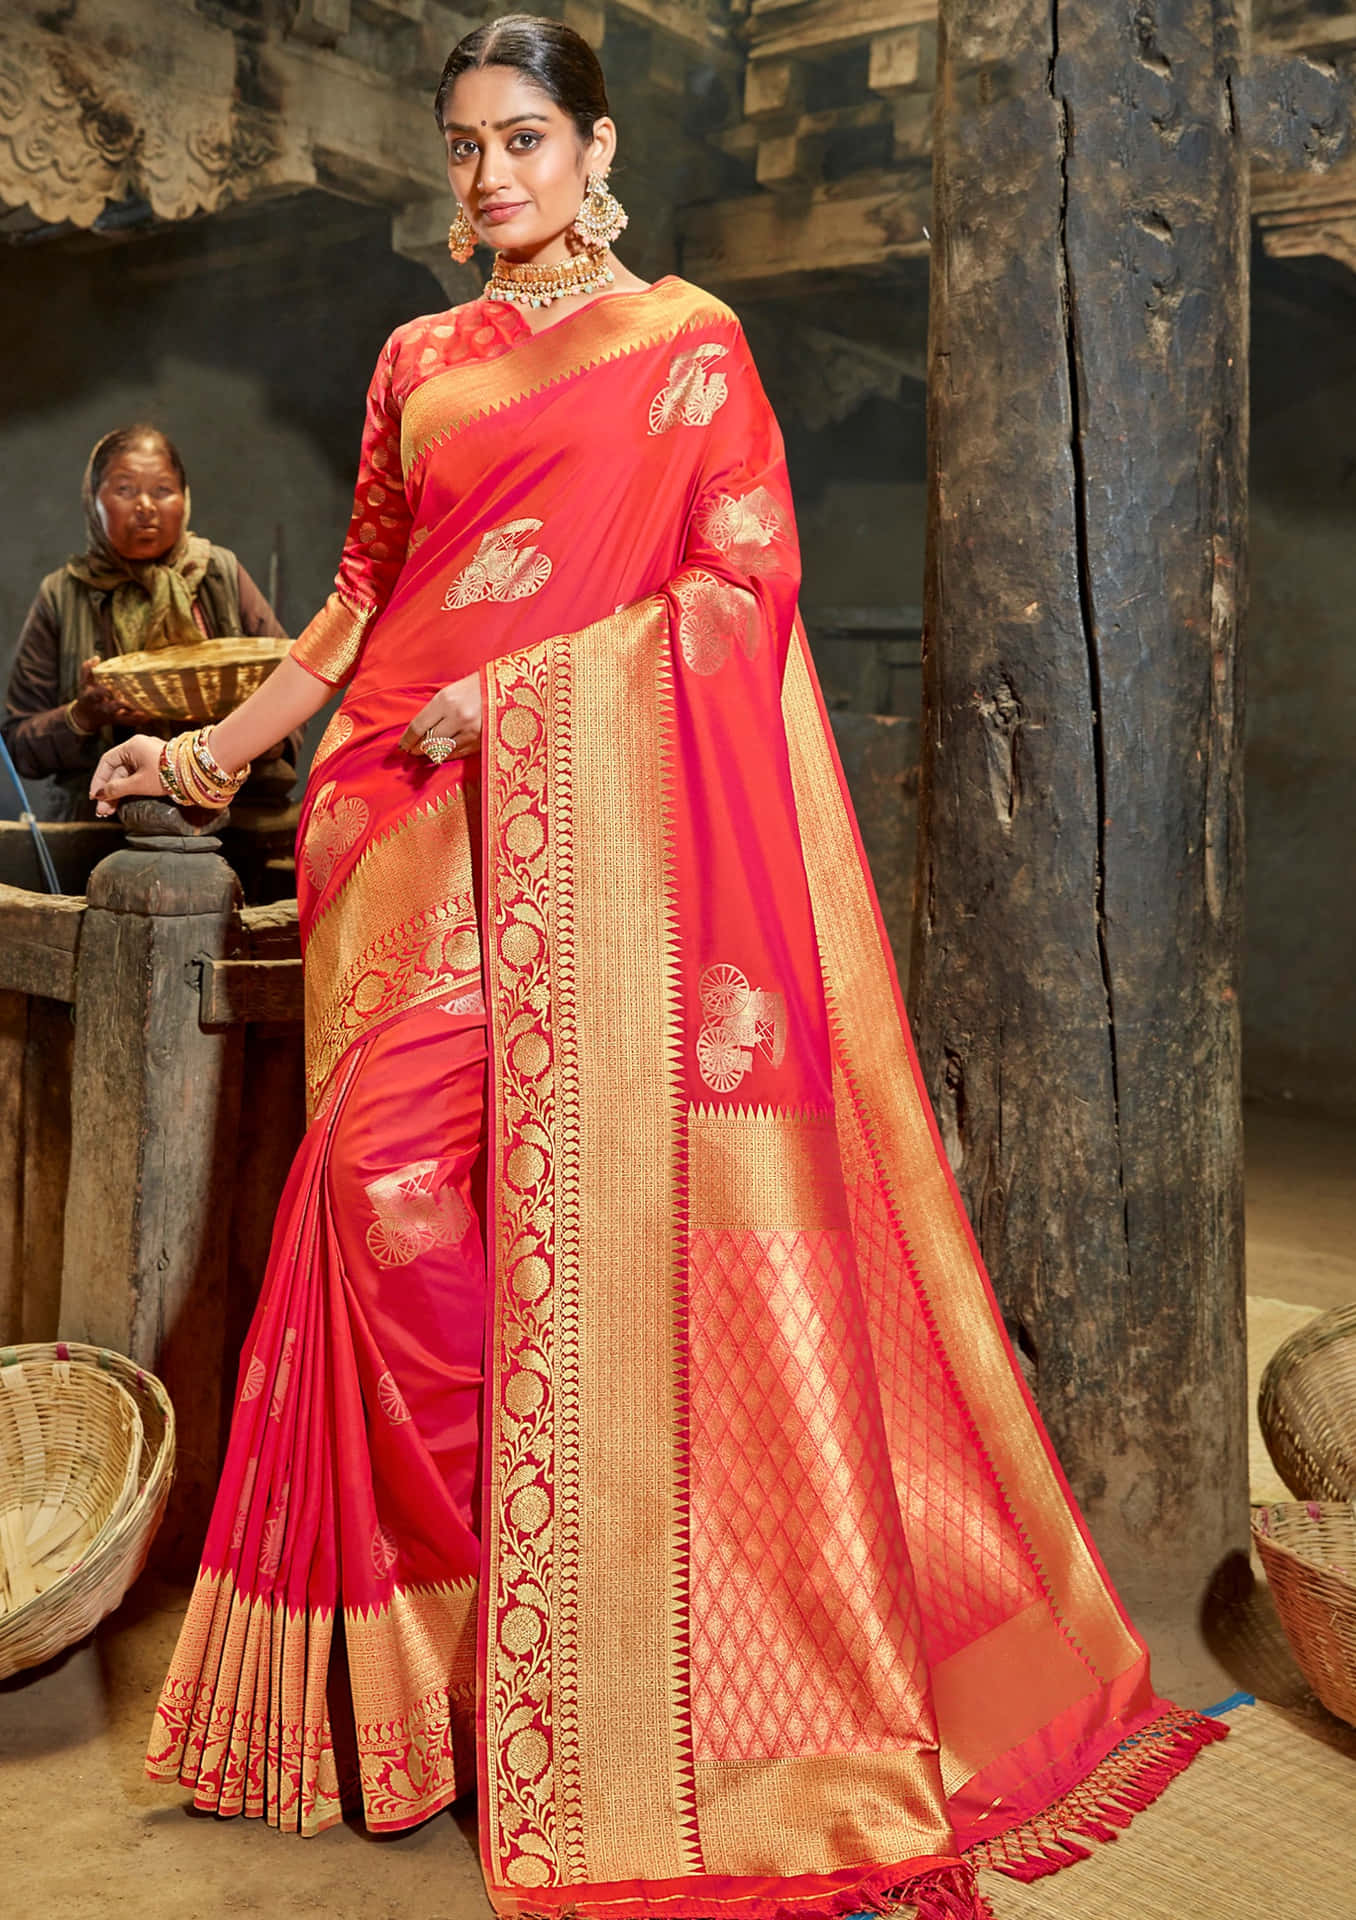 A woman celebrating her culture by wearing a vibrant saree.